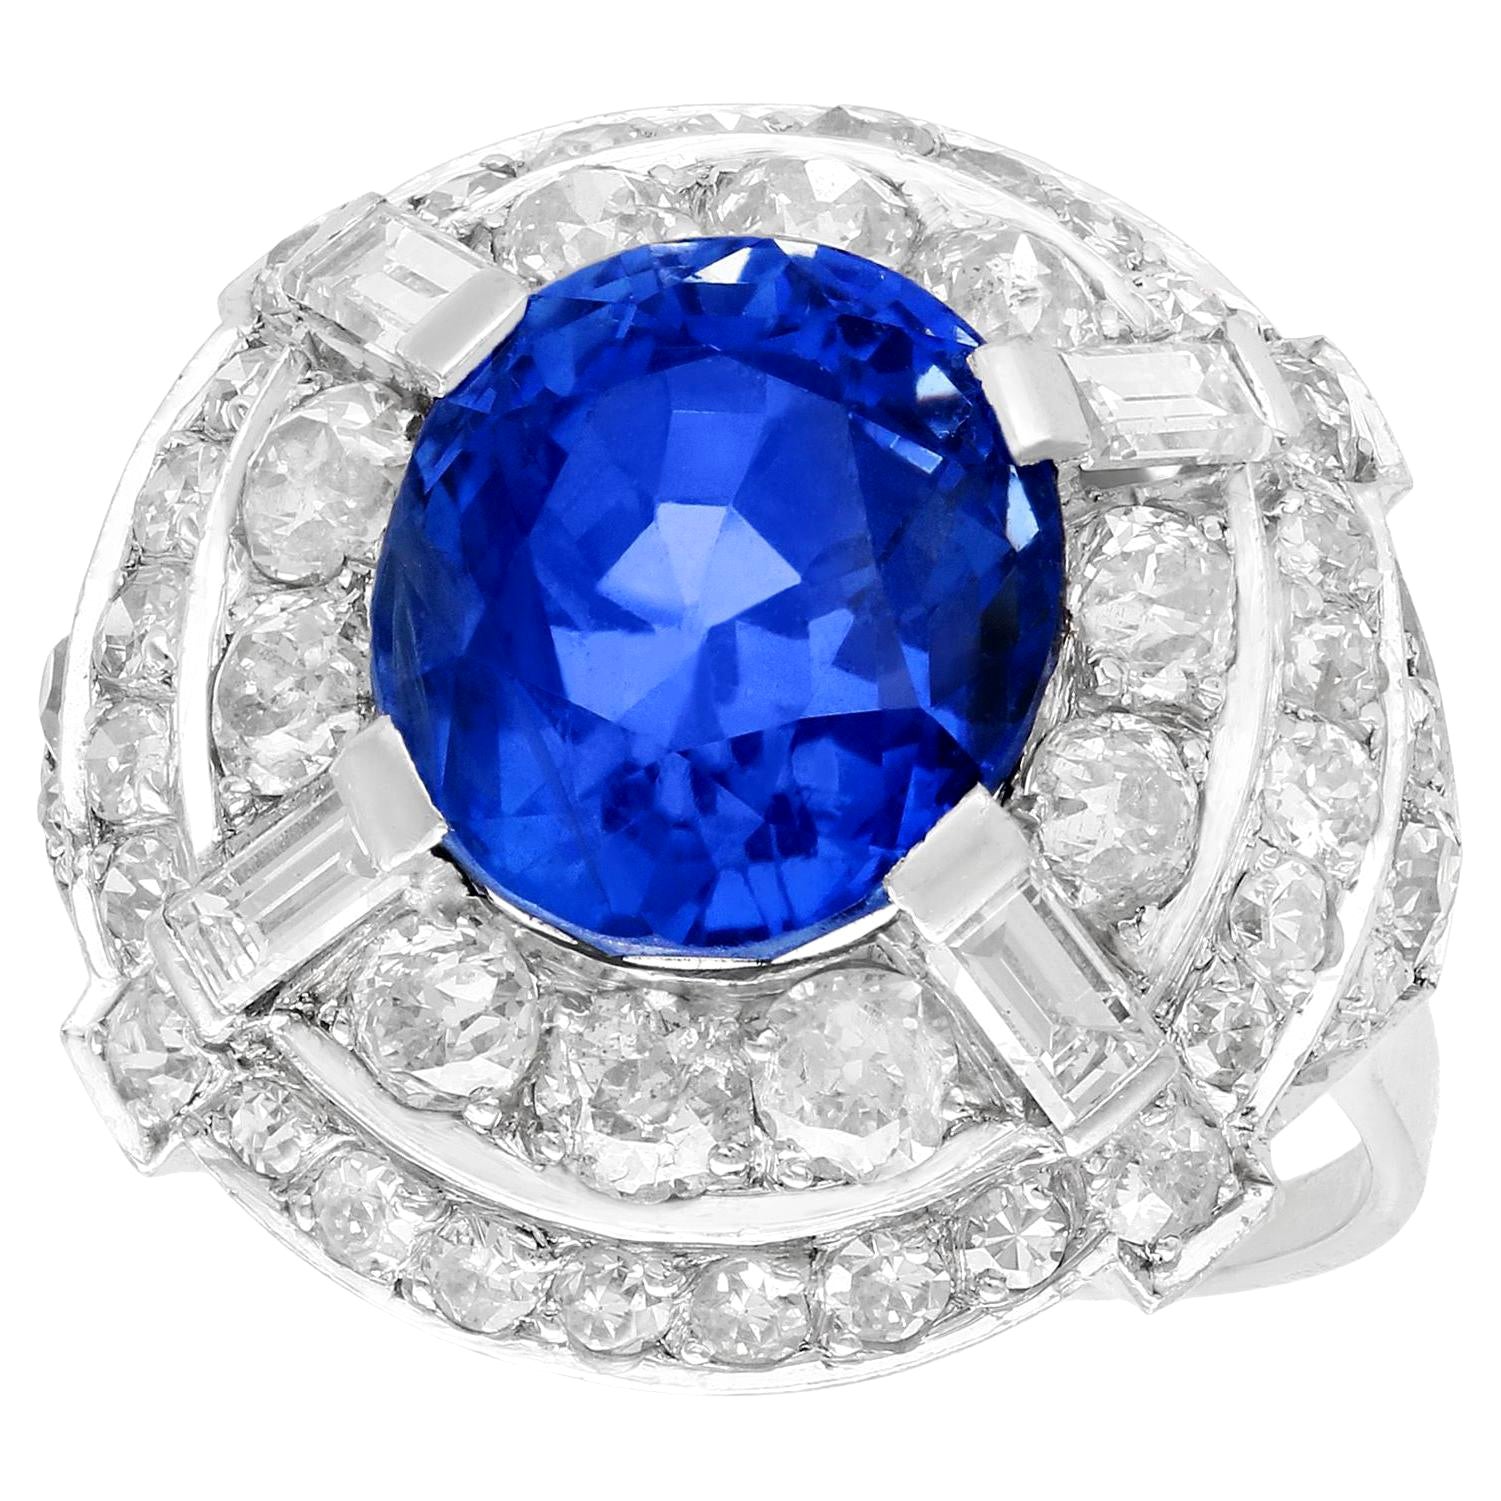 8.80 Carat Ceylon Sapphire and 2.68 Carat Diamond Cocktail Ring in White Gold For Sale